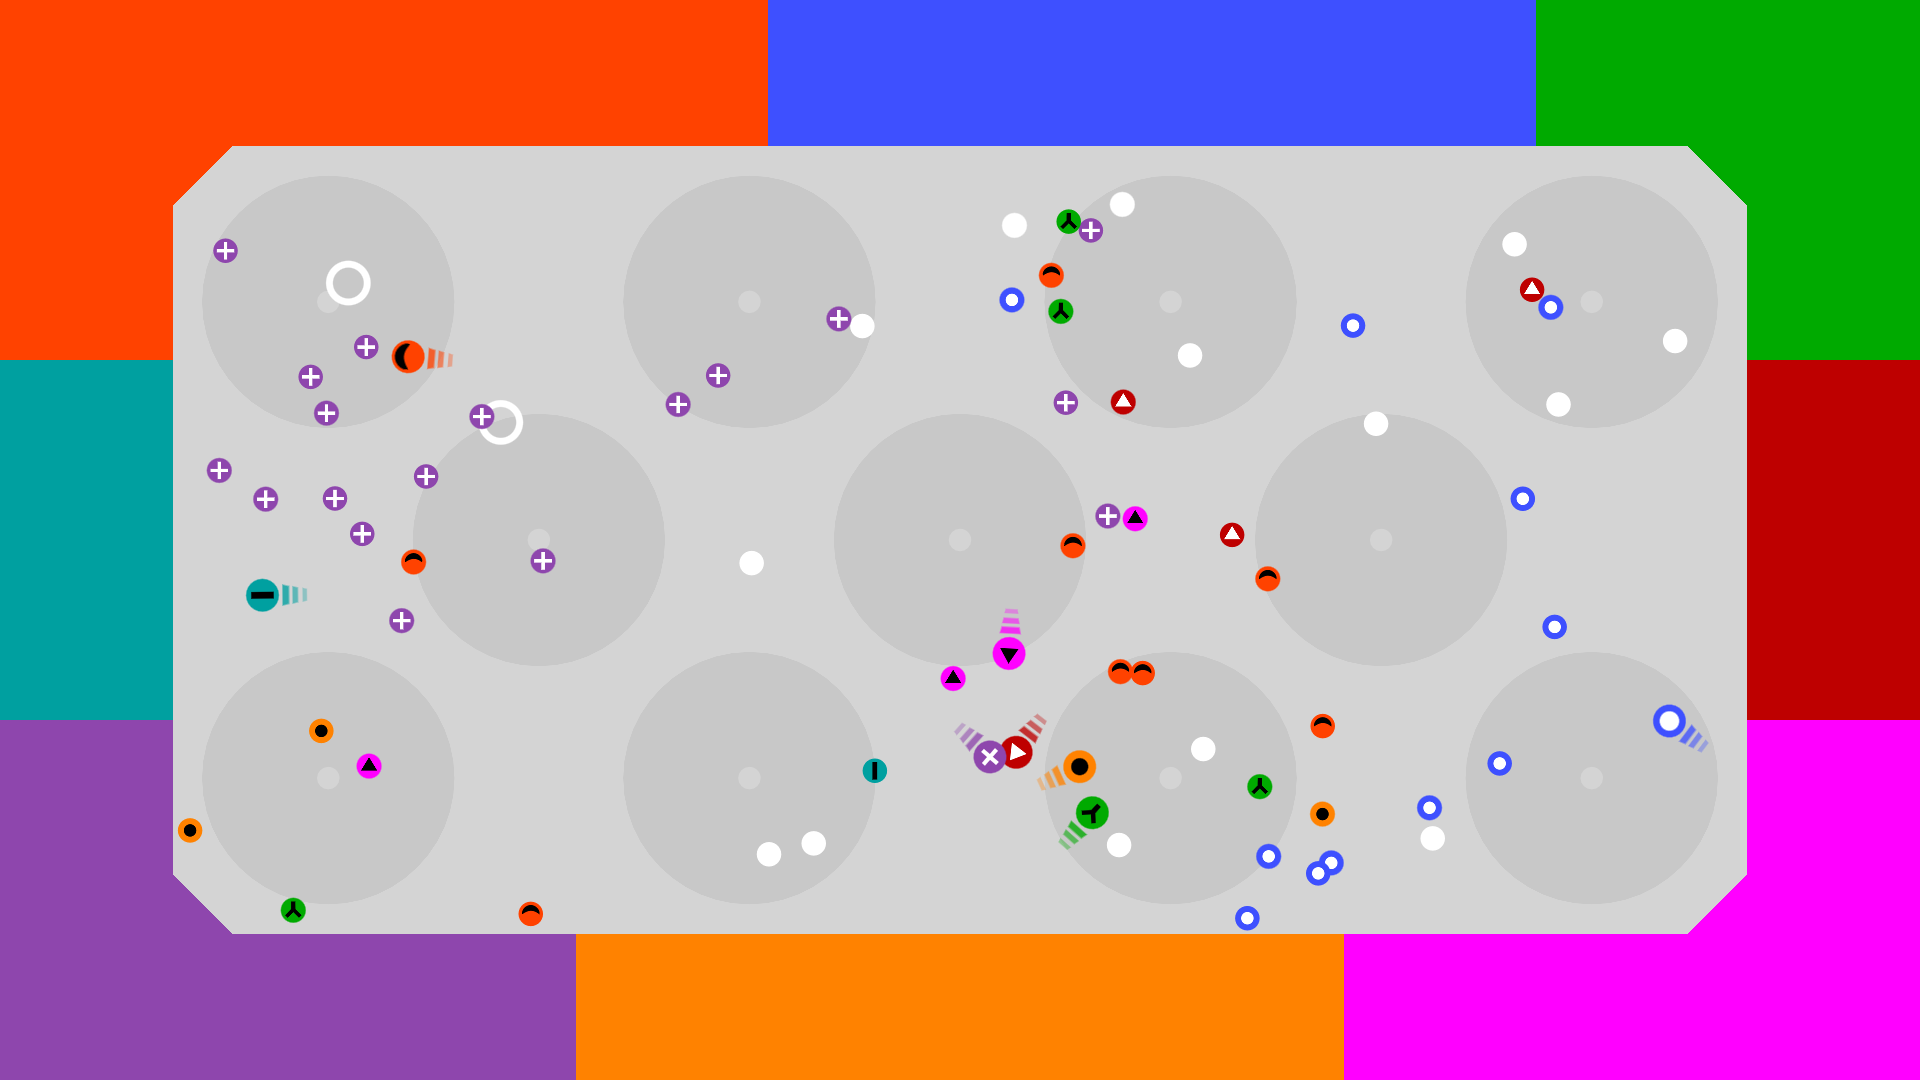 12 orbits - Colorblind Mode - Arena - 8 players